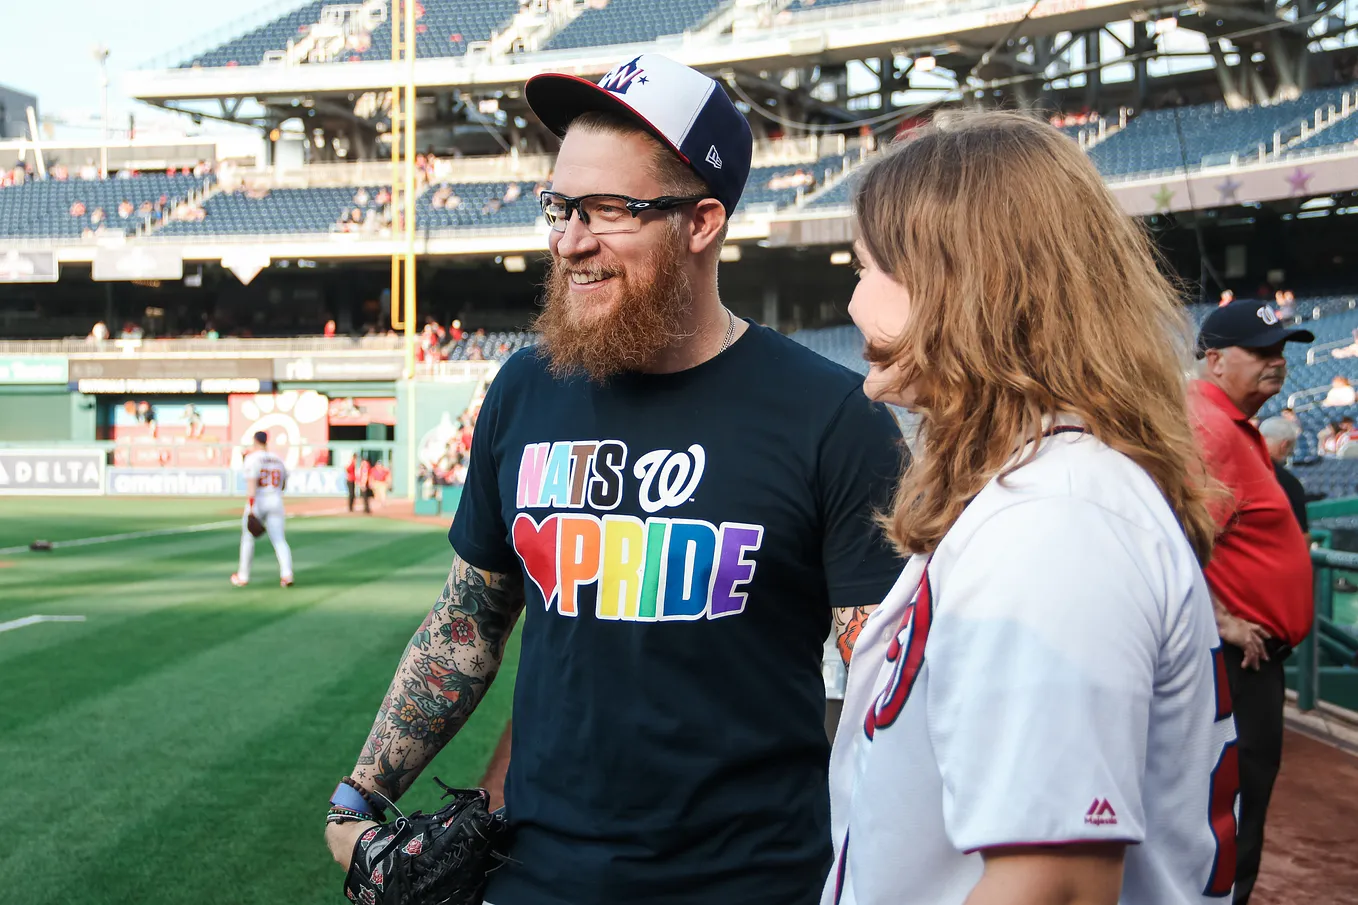 Sean Doolittle (center, with hat, beard and glasses) dons a “Nats (heart) pride” shirt and smiles as he speaks with a woman in the foreground on the right.